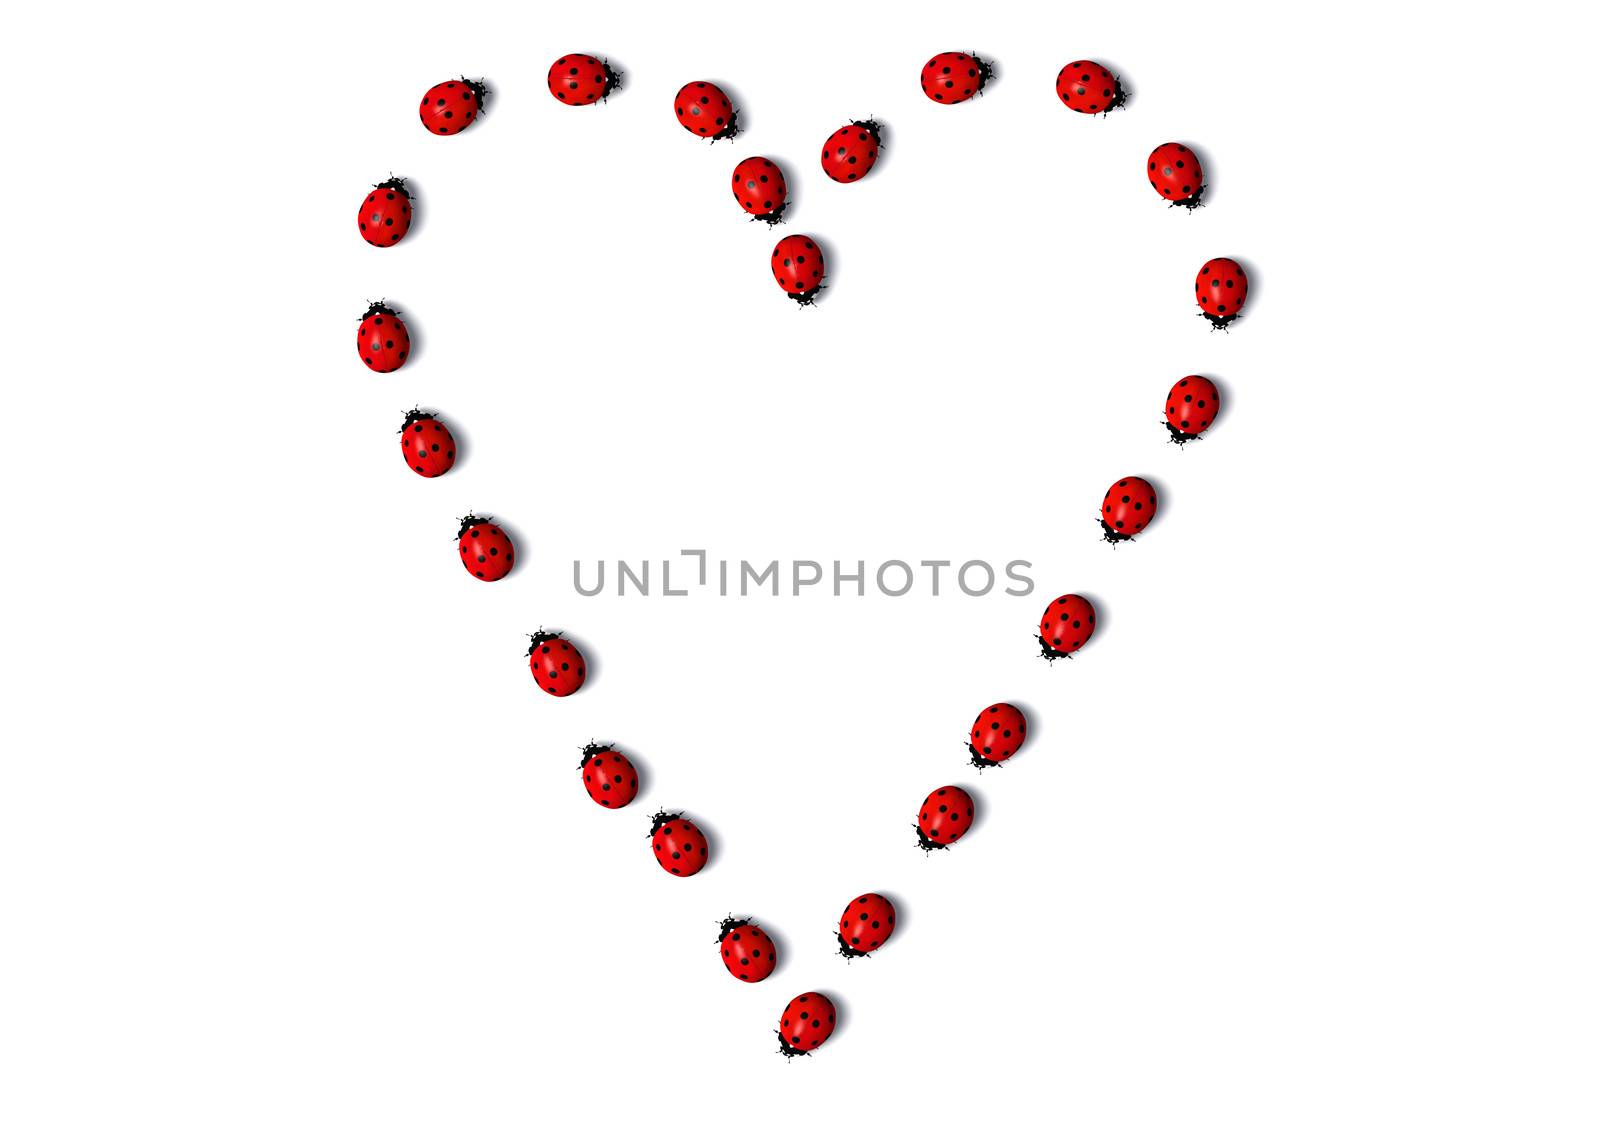 Row of ladybugs forms a heart shape by TaiChesco